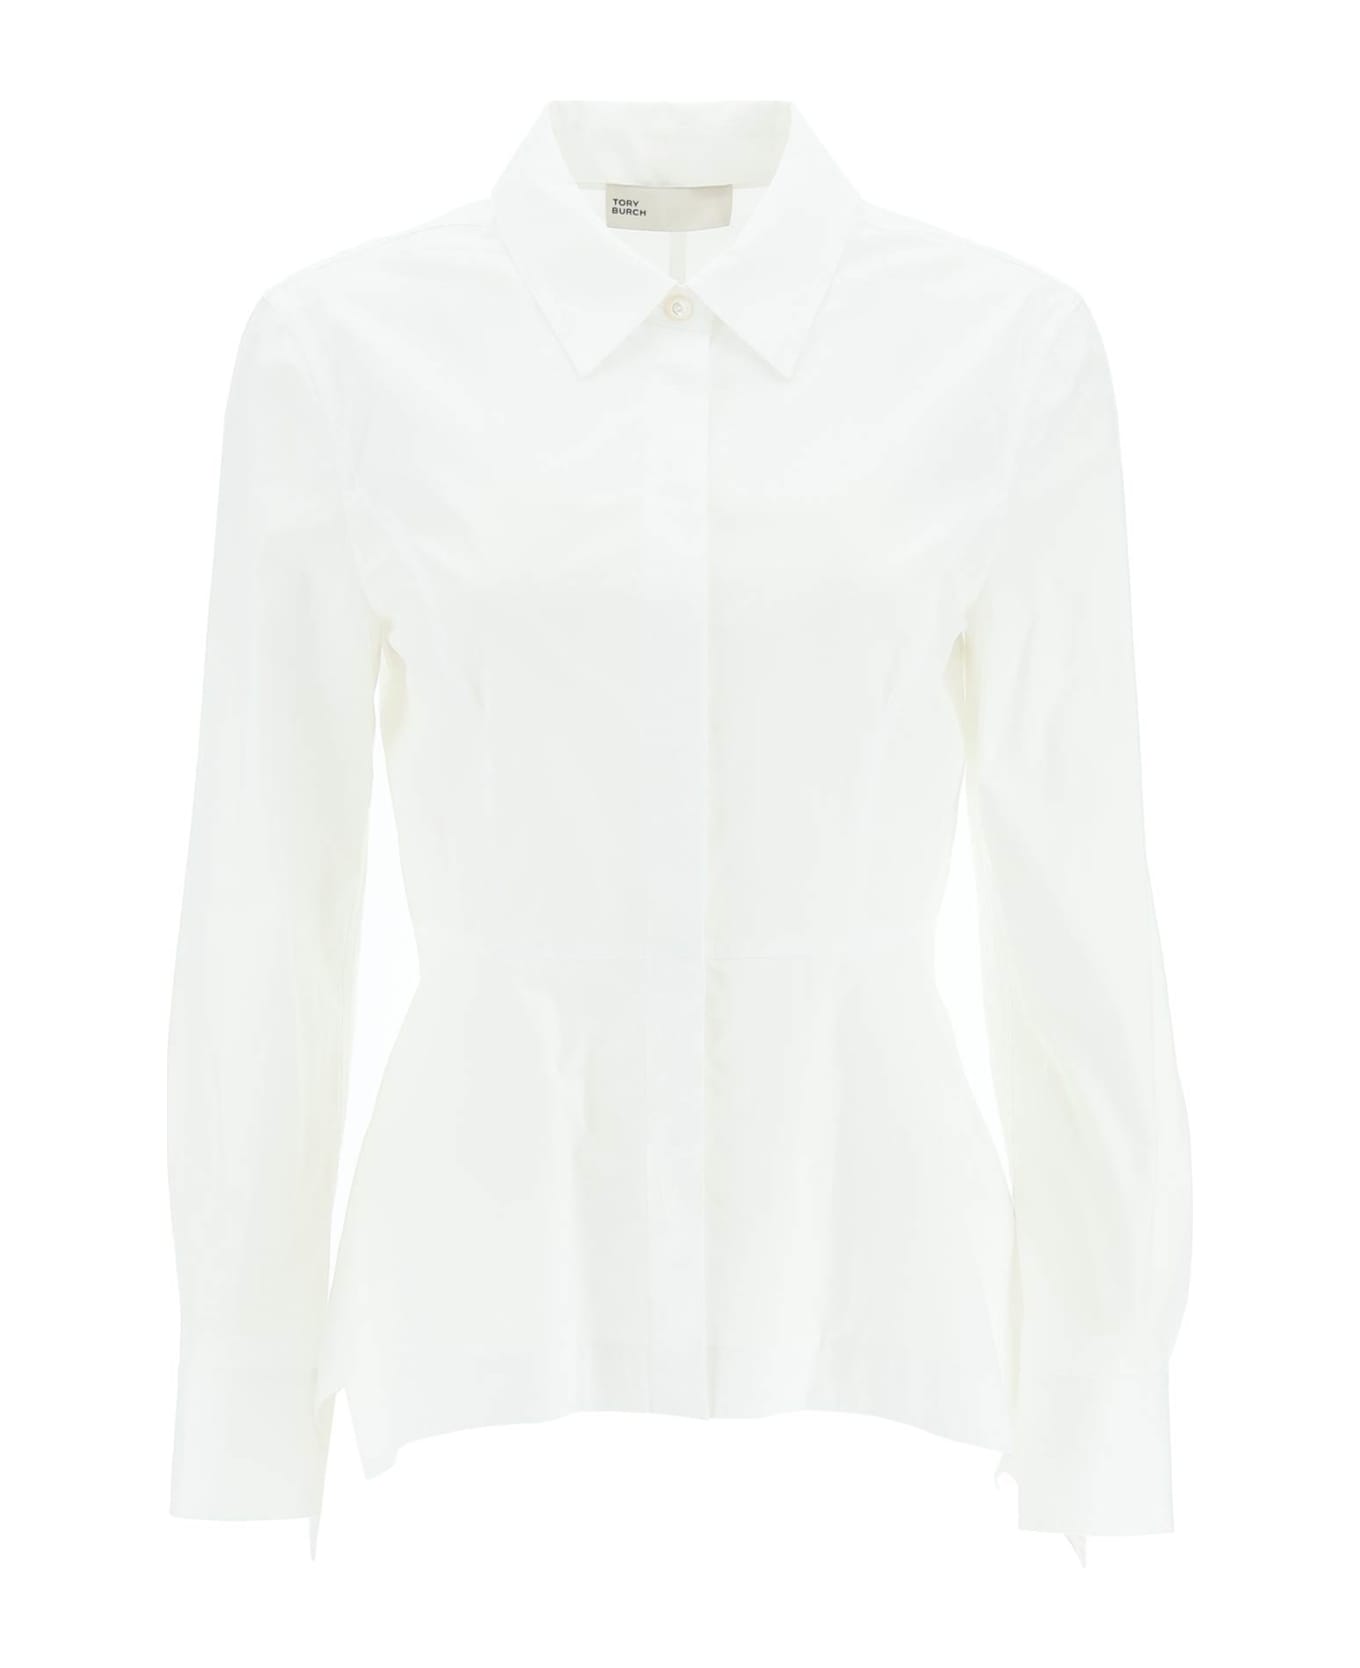 Tory Burch Shirt With Pleats - WHITE (White)